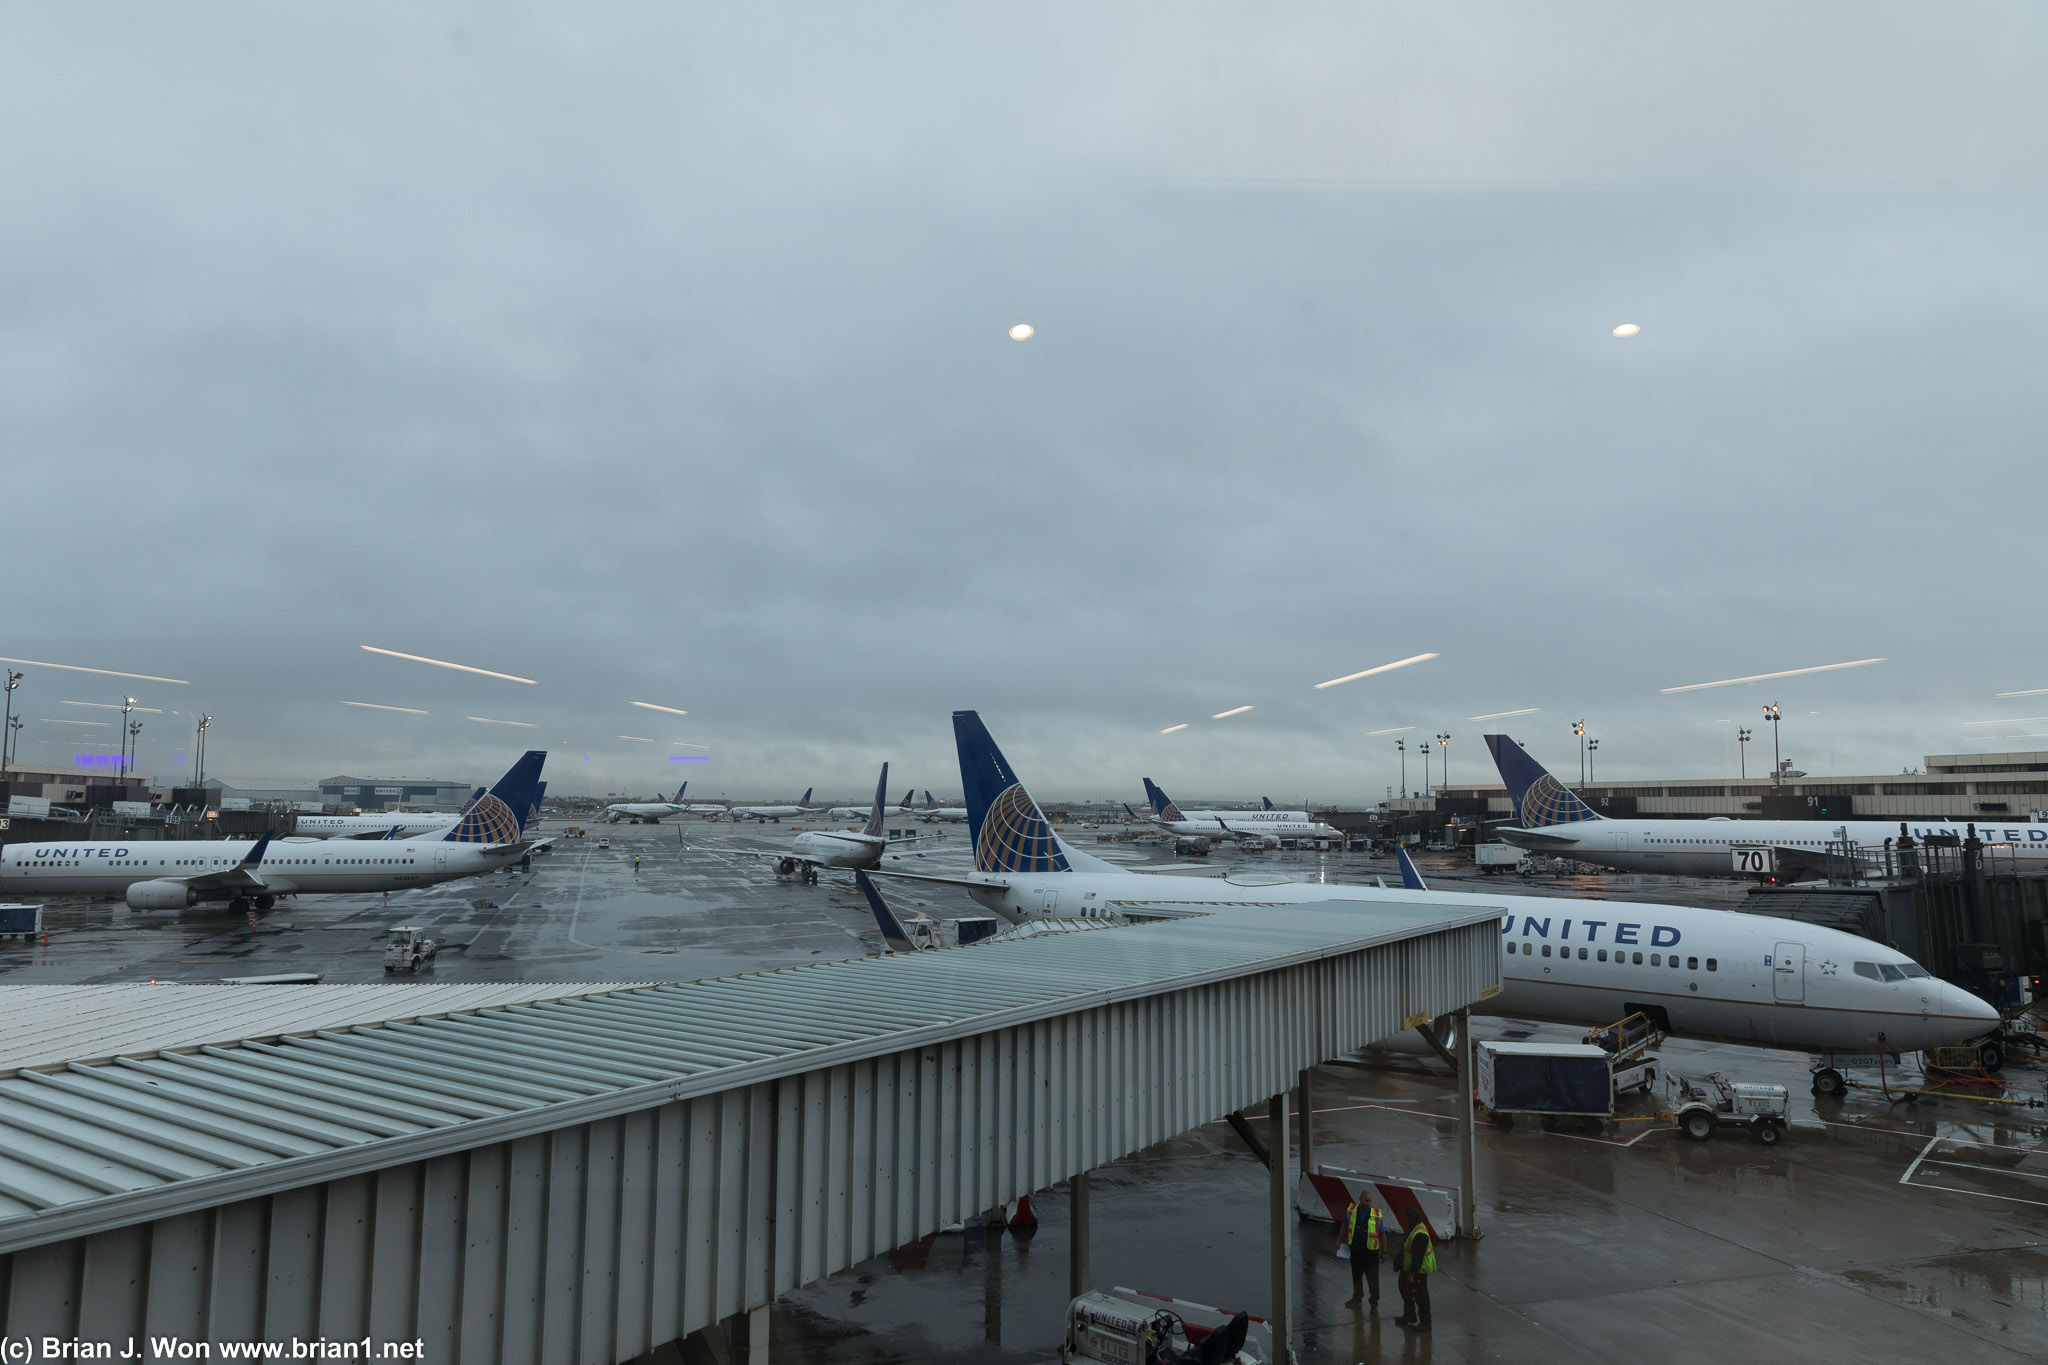 At least a dozen United ariplanes, mostly Boeing 737's.